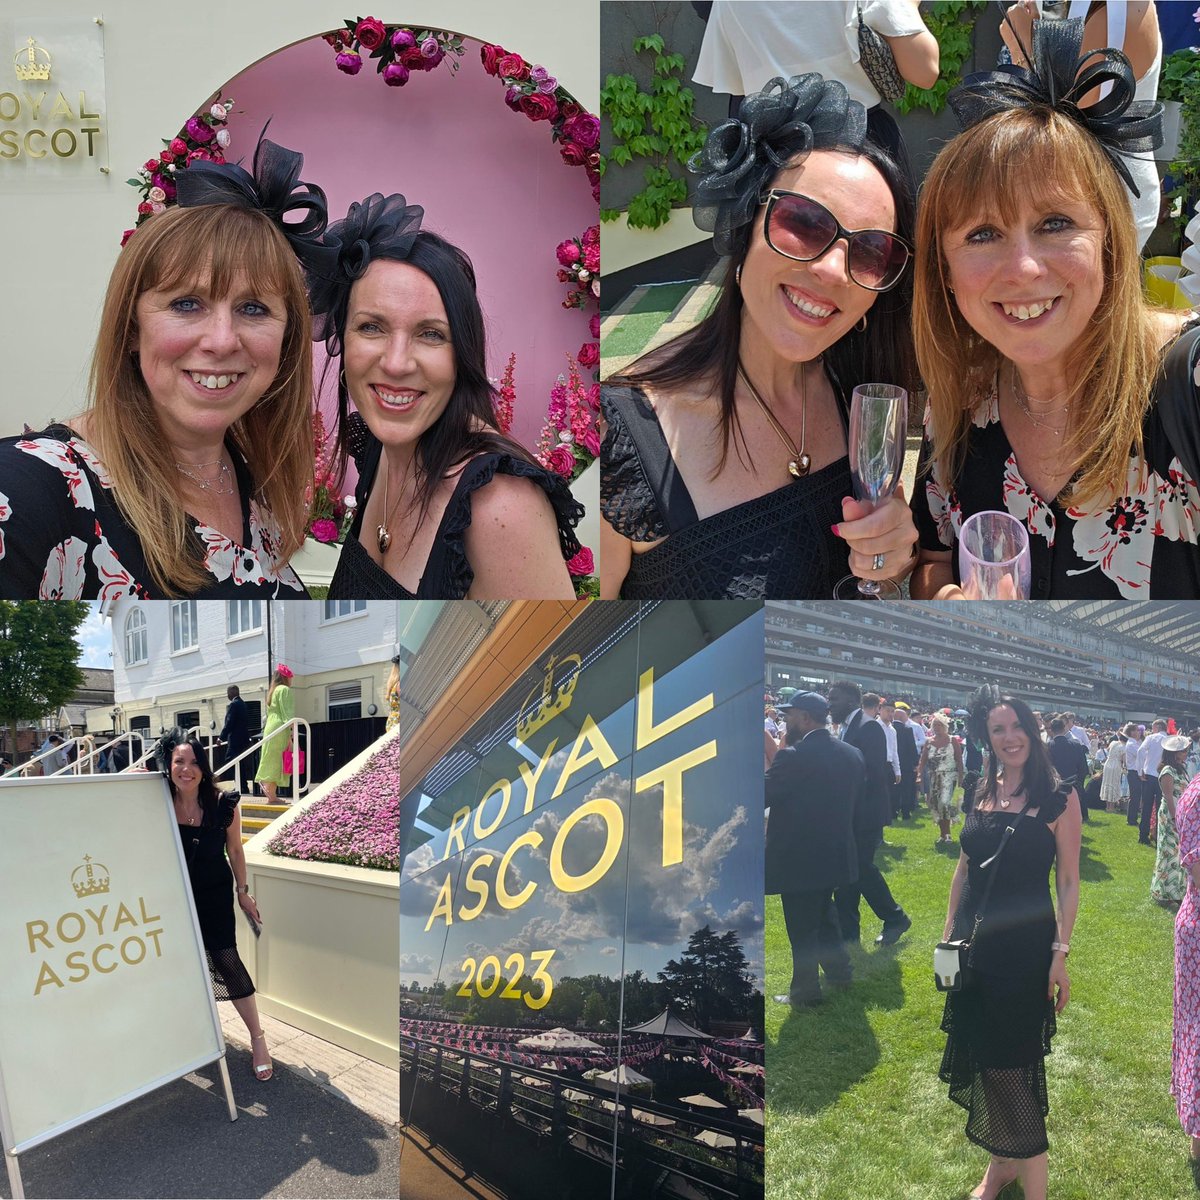 Fabulous sunny day in the Queen Anne Enclosure at Royal Ascot with @cederrick9 #RoyalAscot2023 #LadiesDay 🏇🏿☀️🏇🏿☀️🏇🏿☀️